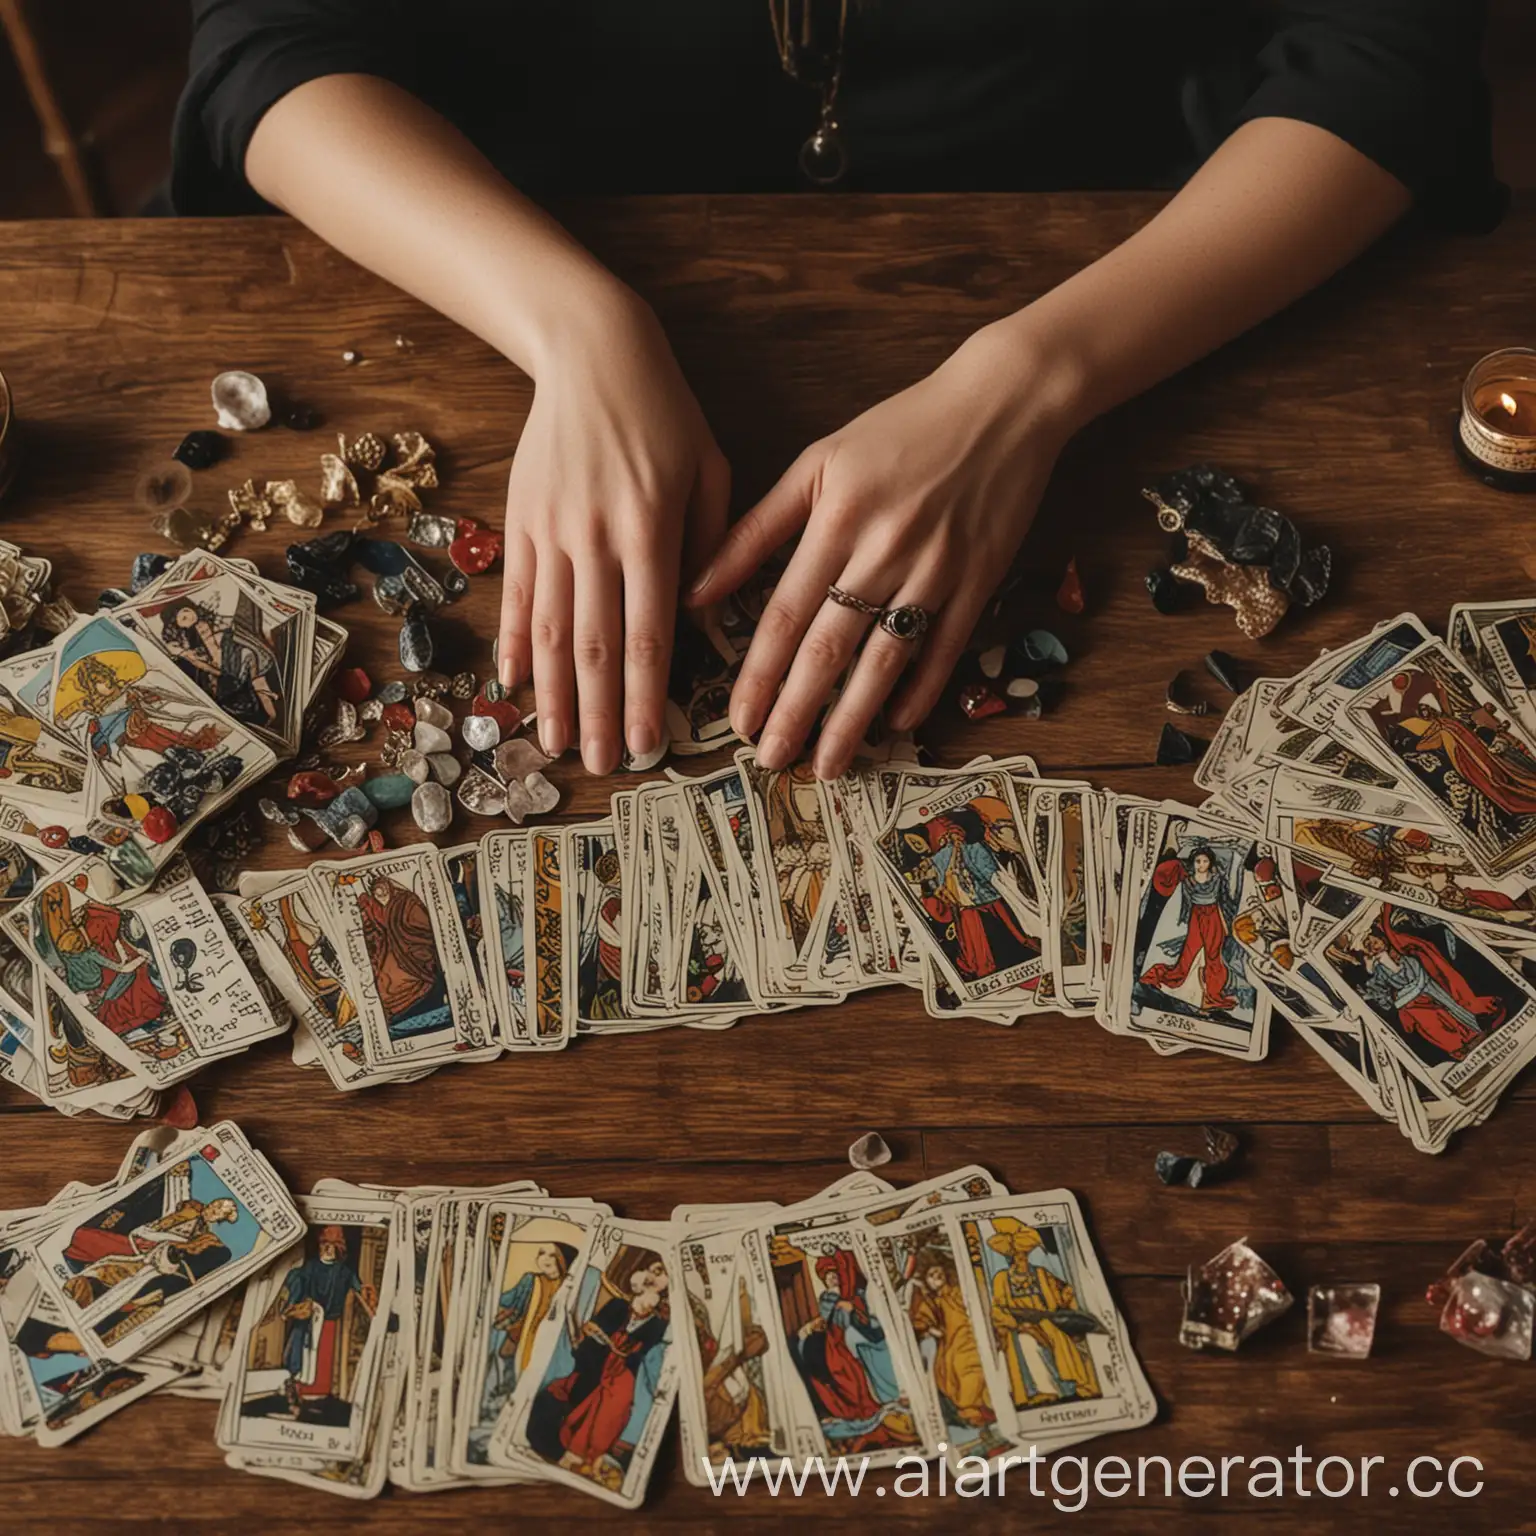 Woman-Practicing-FortuneTelling-with-Tarot-Cards